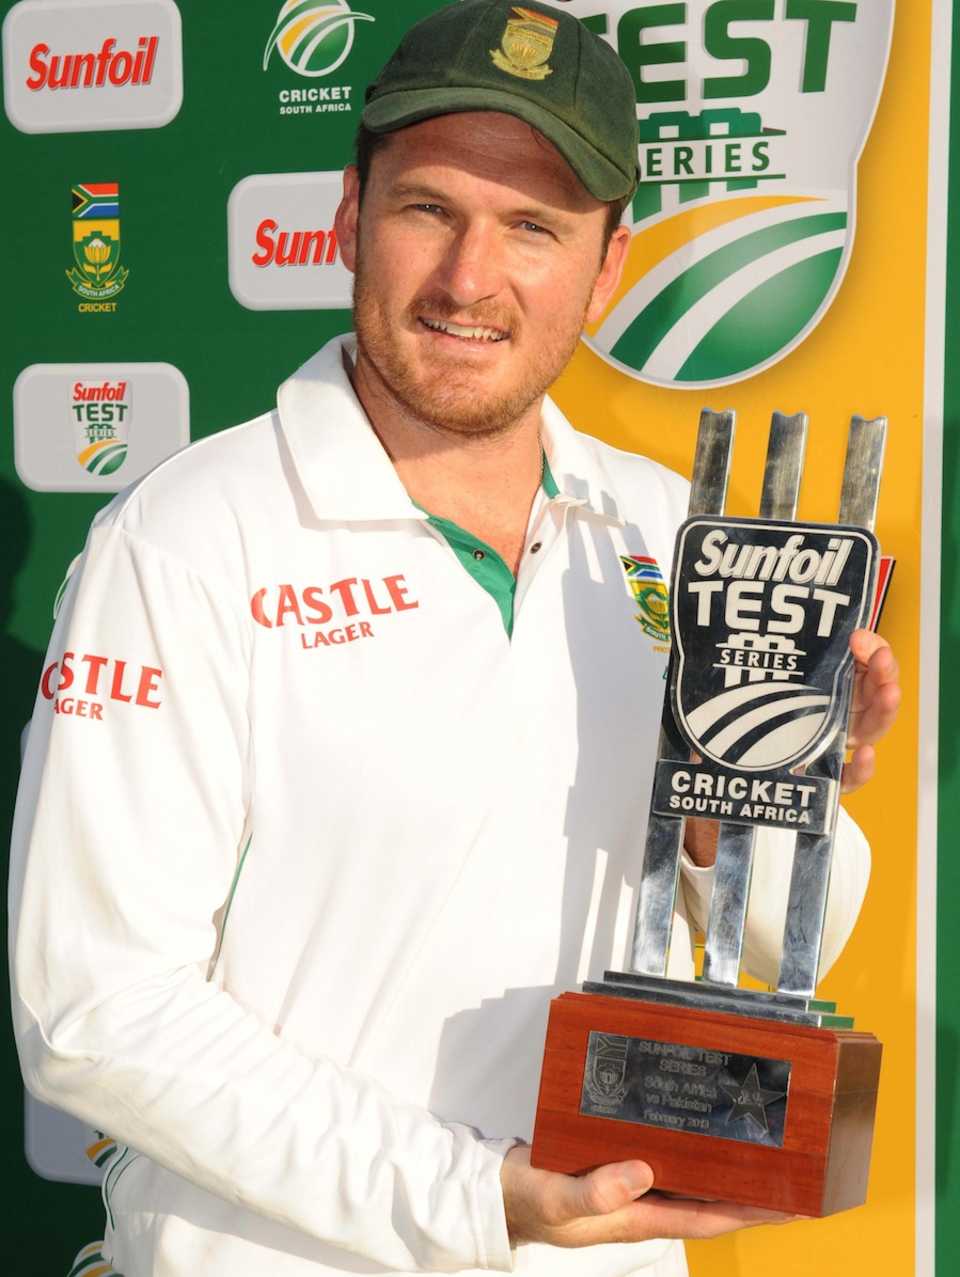 Graeme Smith with the winners trophy, South Africa v Pakistan, 3rd Test, Centurion, 3rd day, February 24, 2013